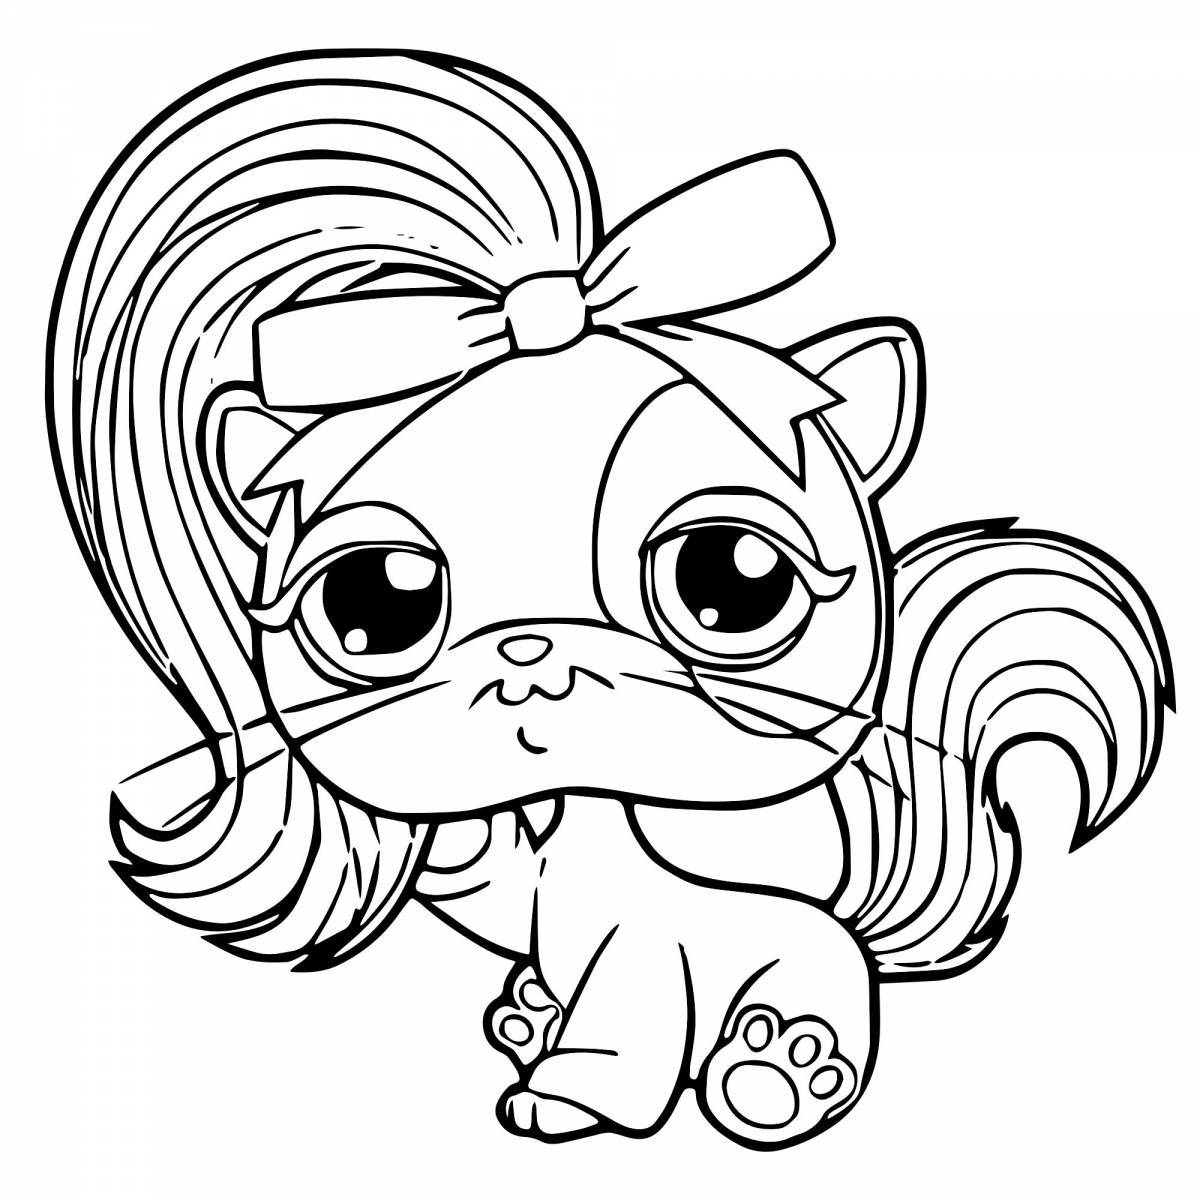 Lovely vip pets coloring page